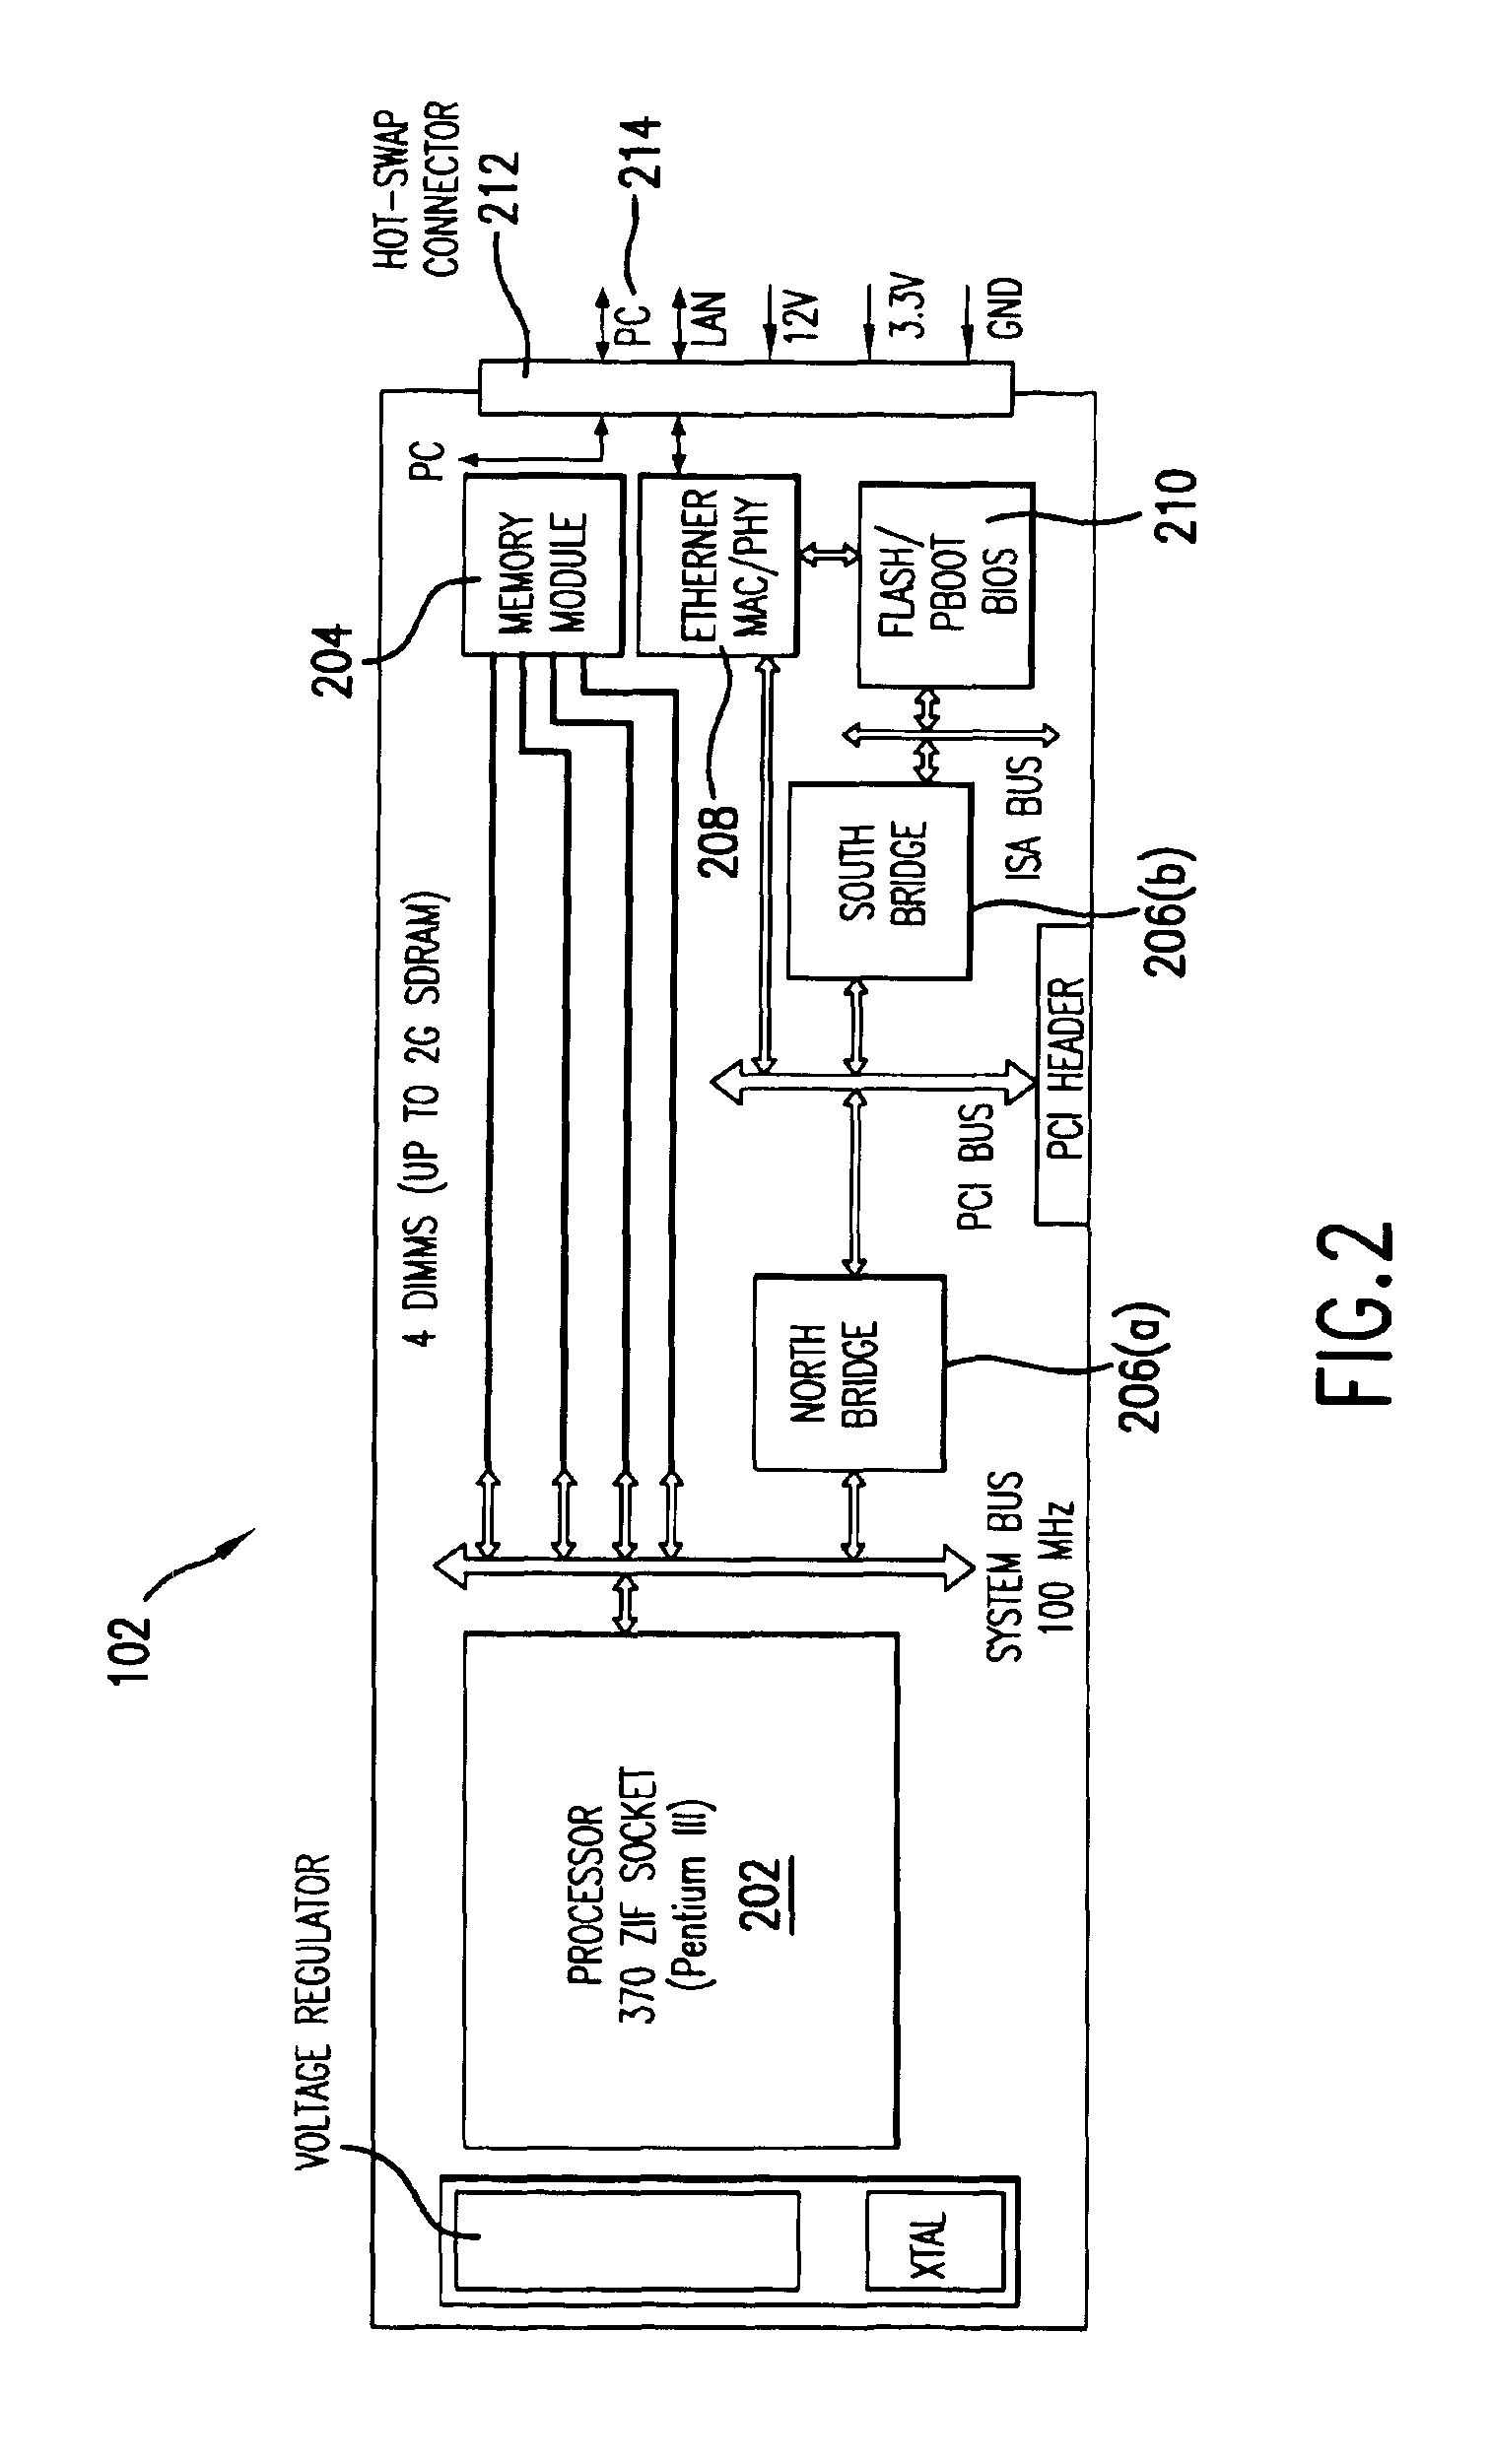 Cluster component network appliance system and method for enhancing fault tolerance and hot-swapping